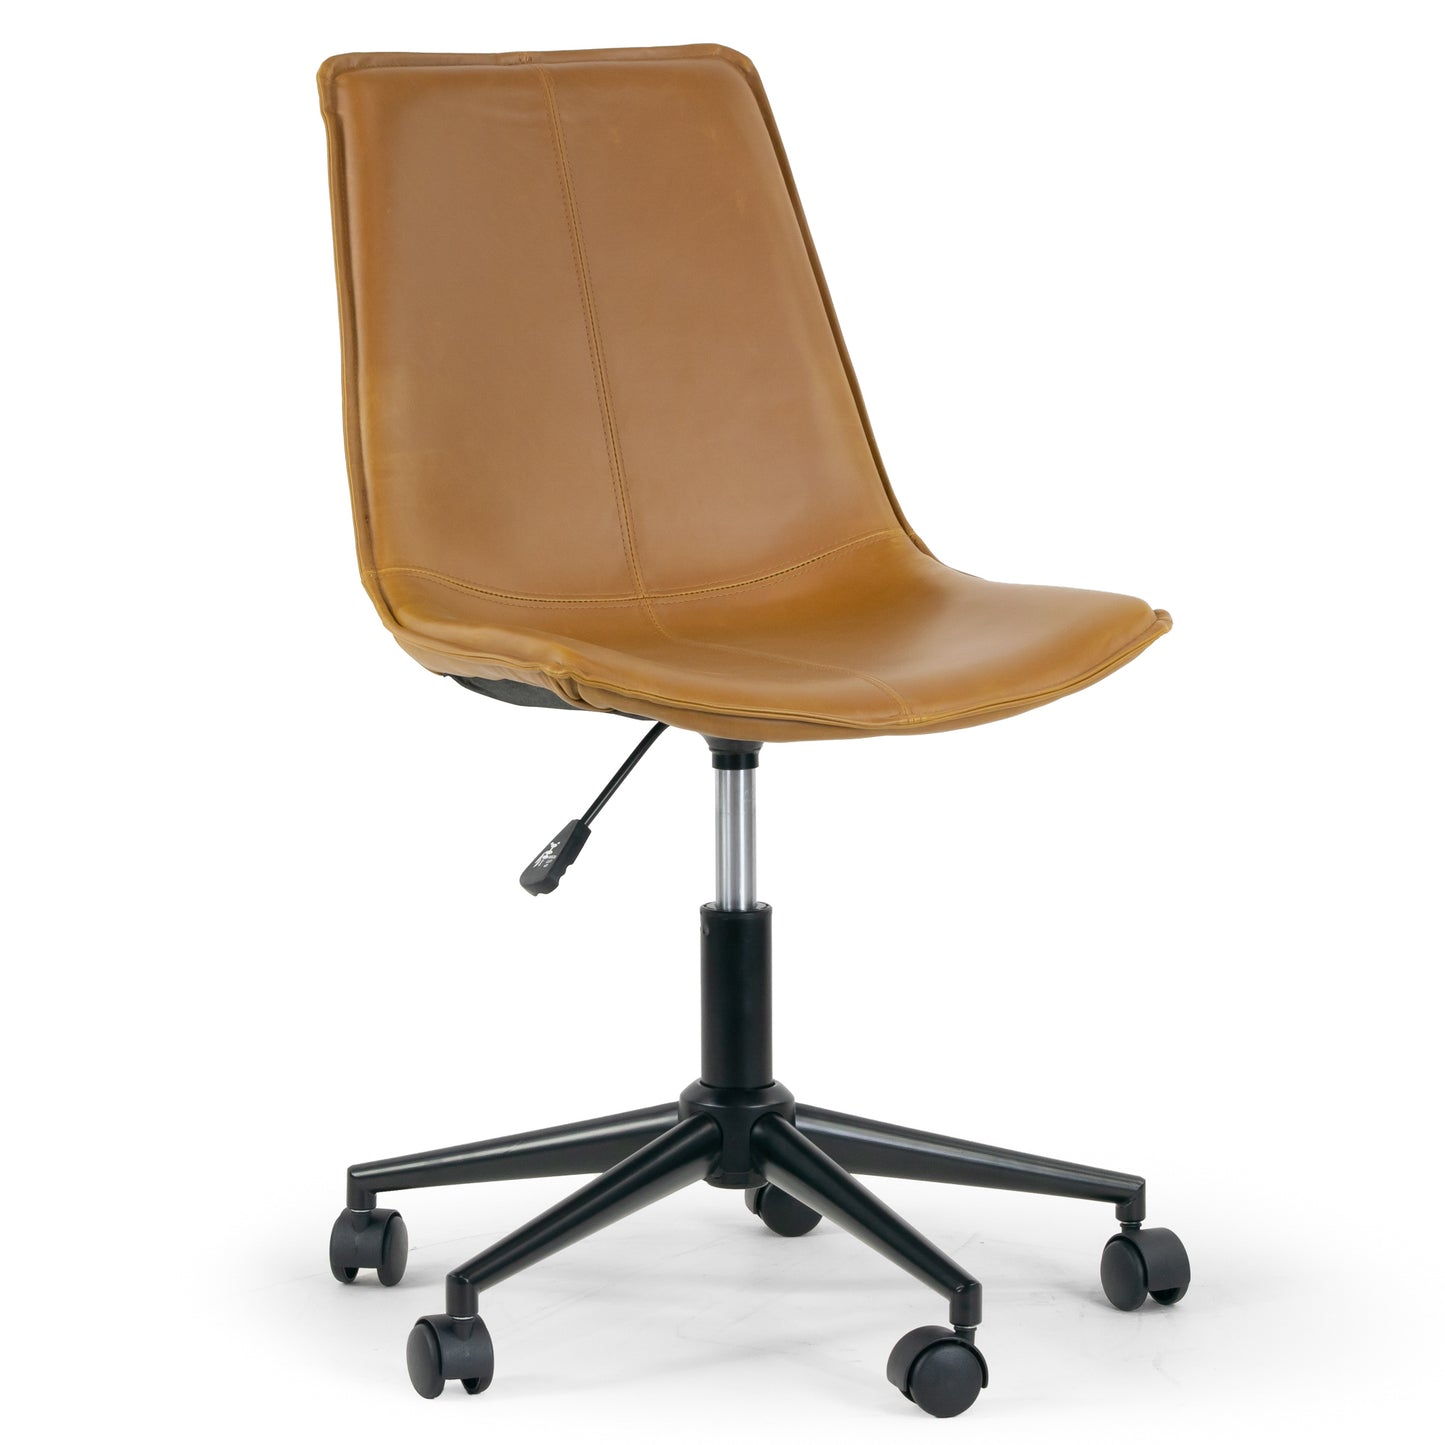 Amery Light Brown Faux Leather Adjustable Height Swivel Office Chair with Wheel Base